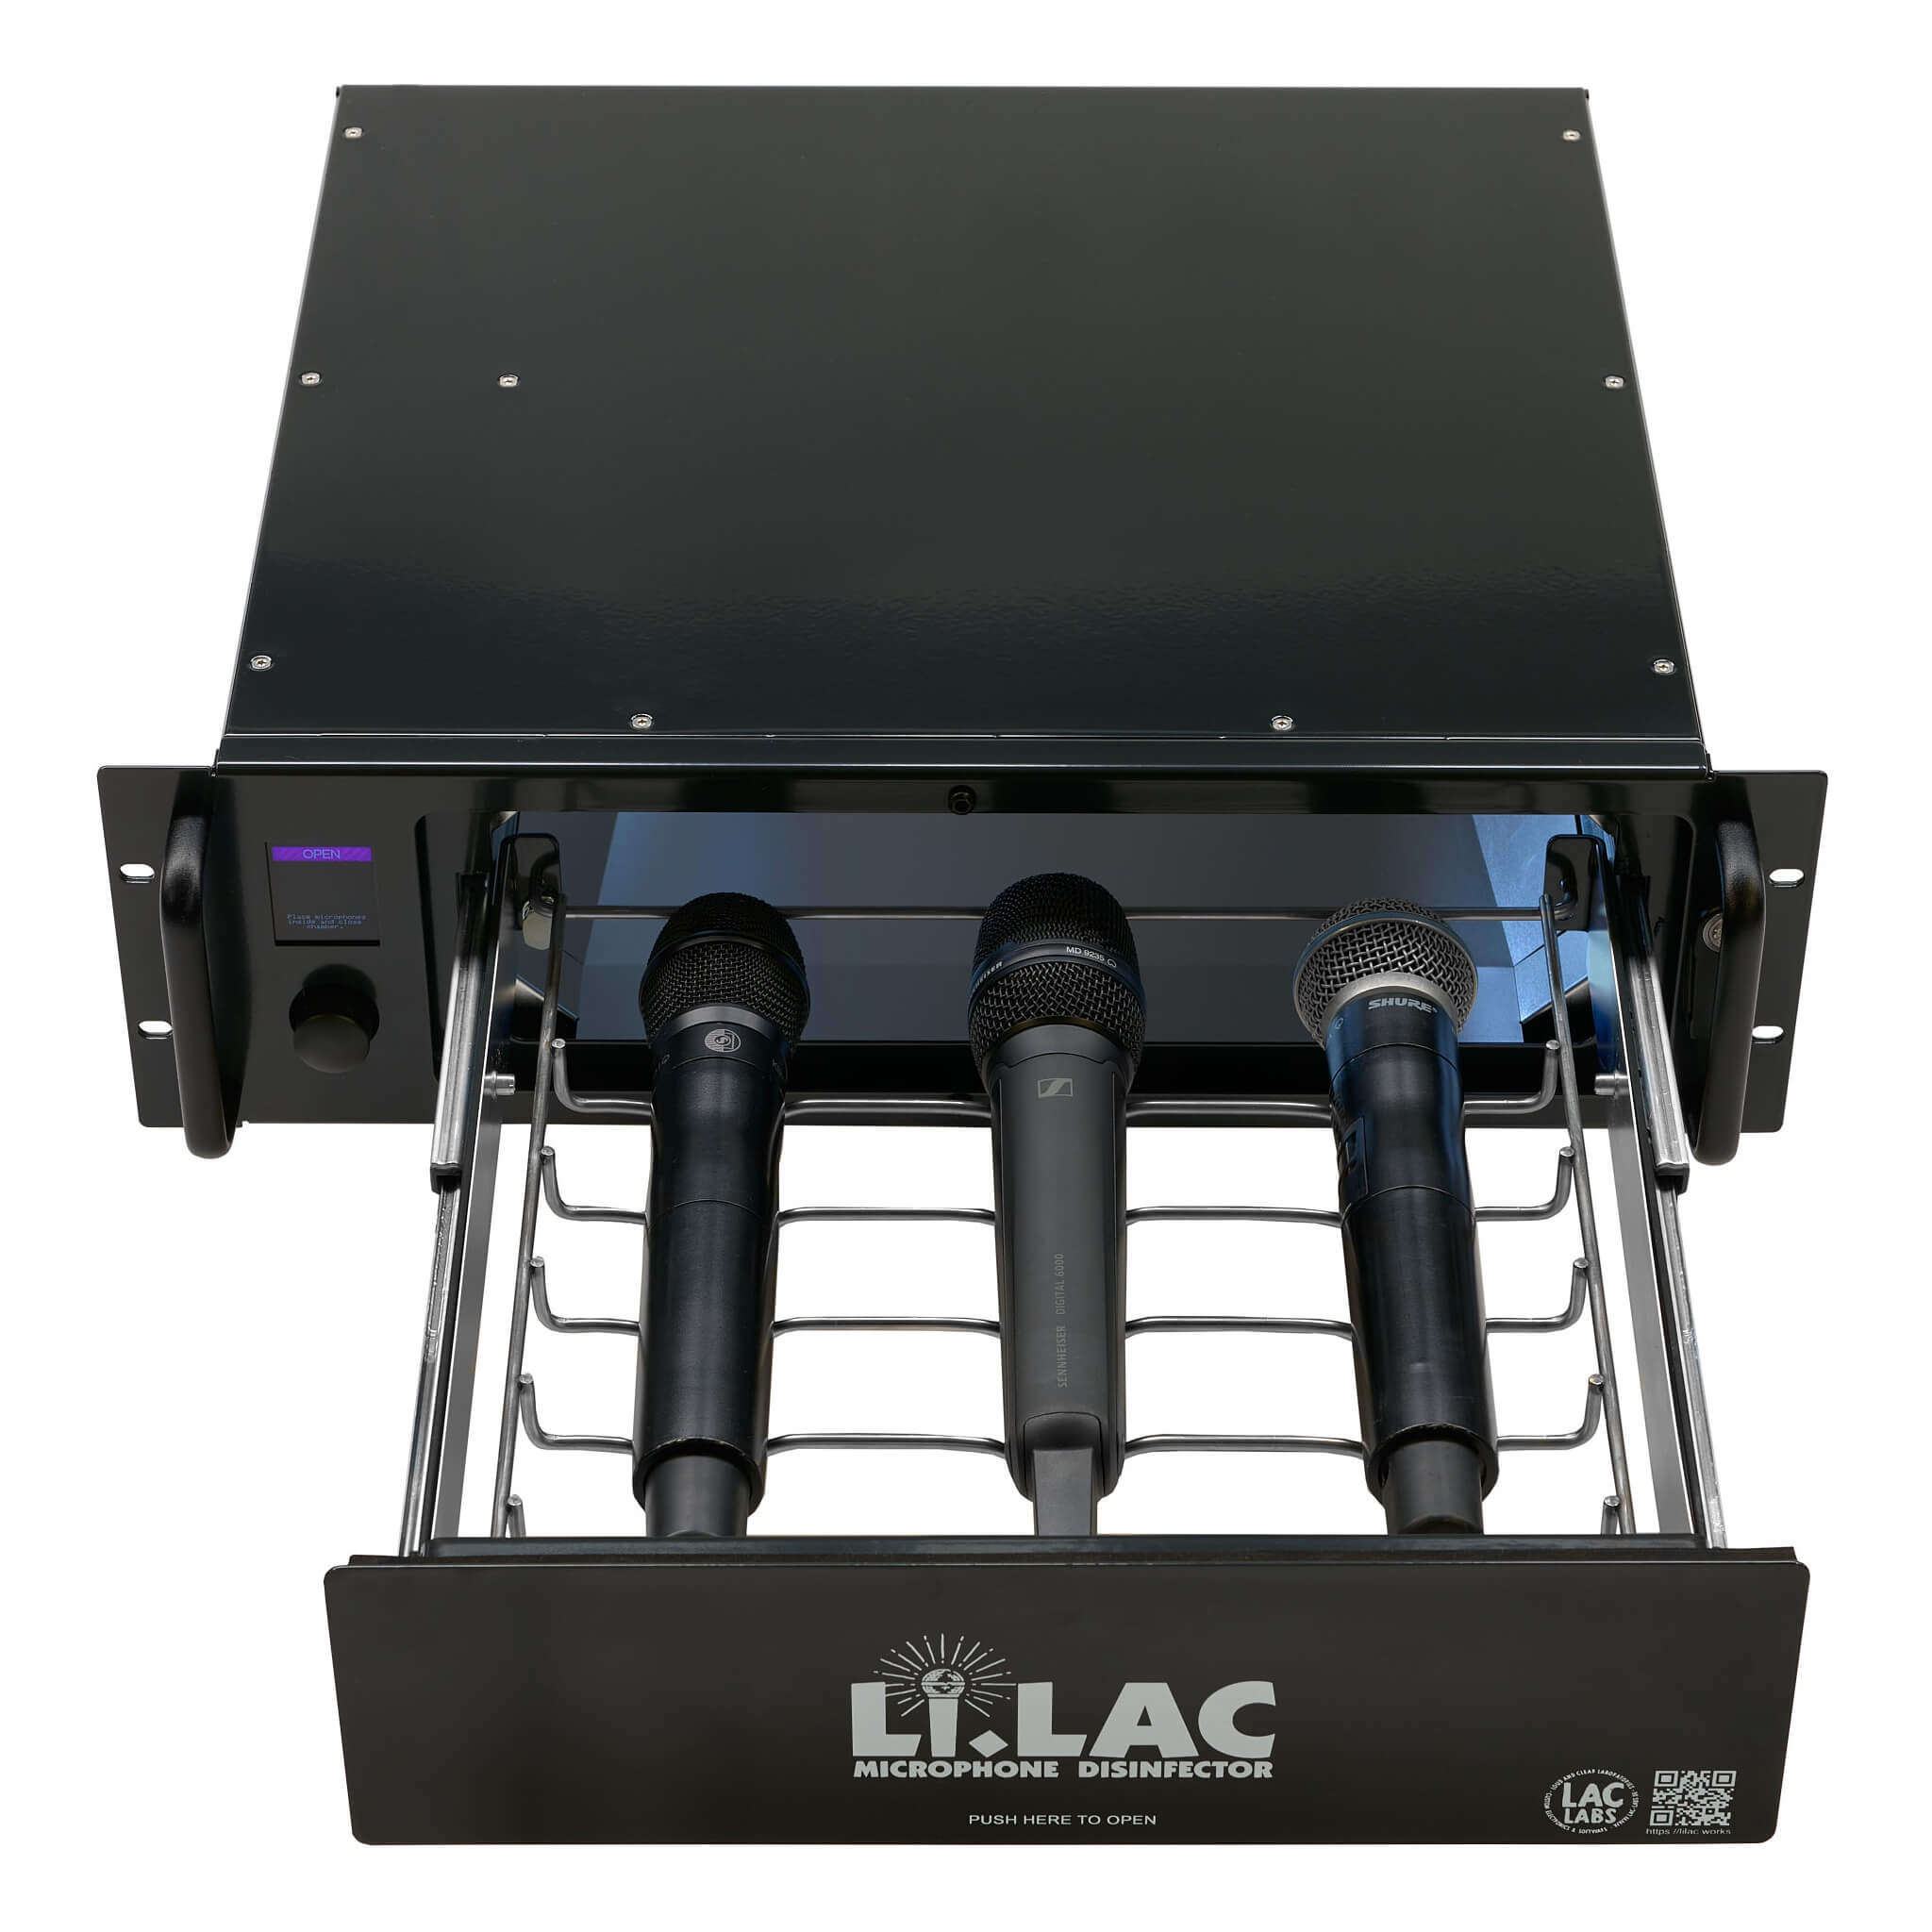 Li.LAC - Microphone Disinfection System, top